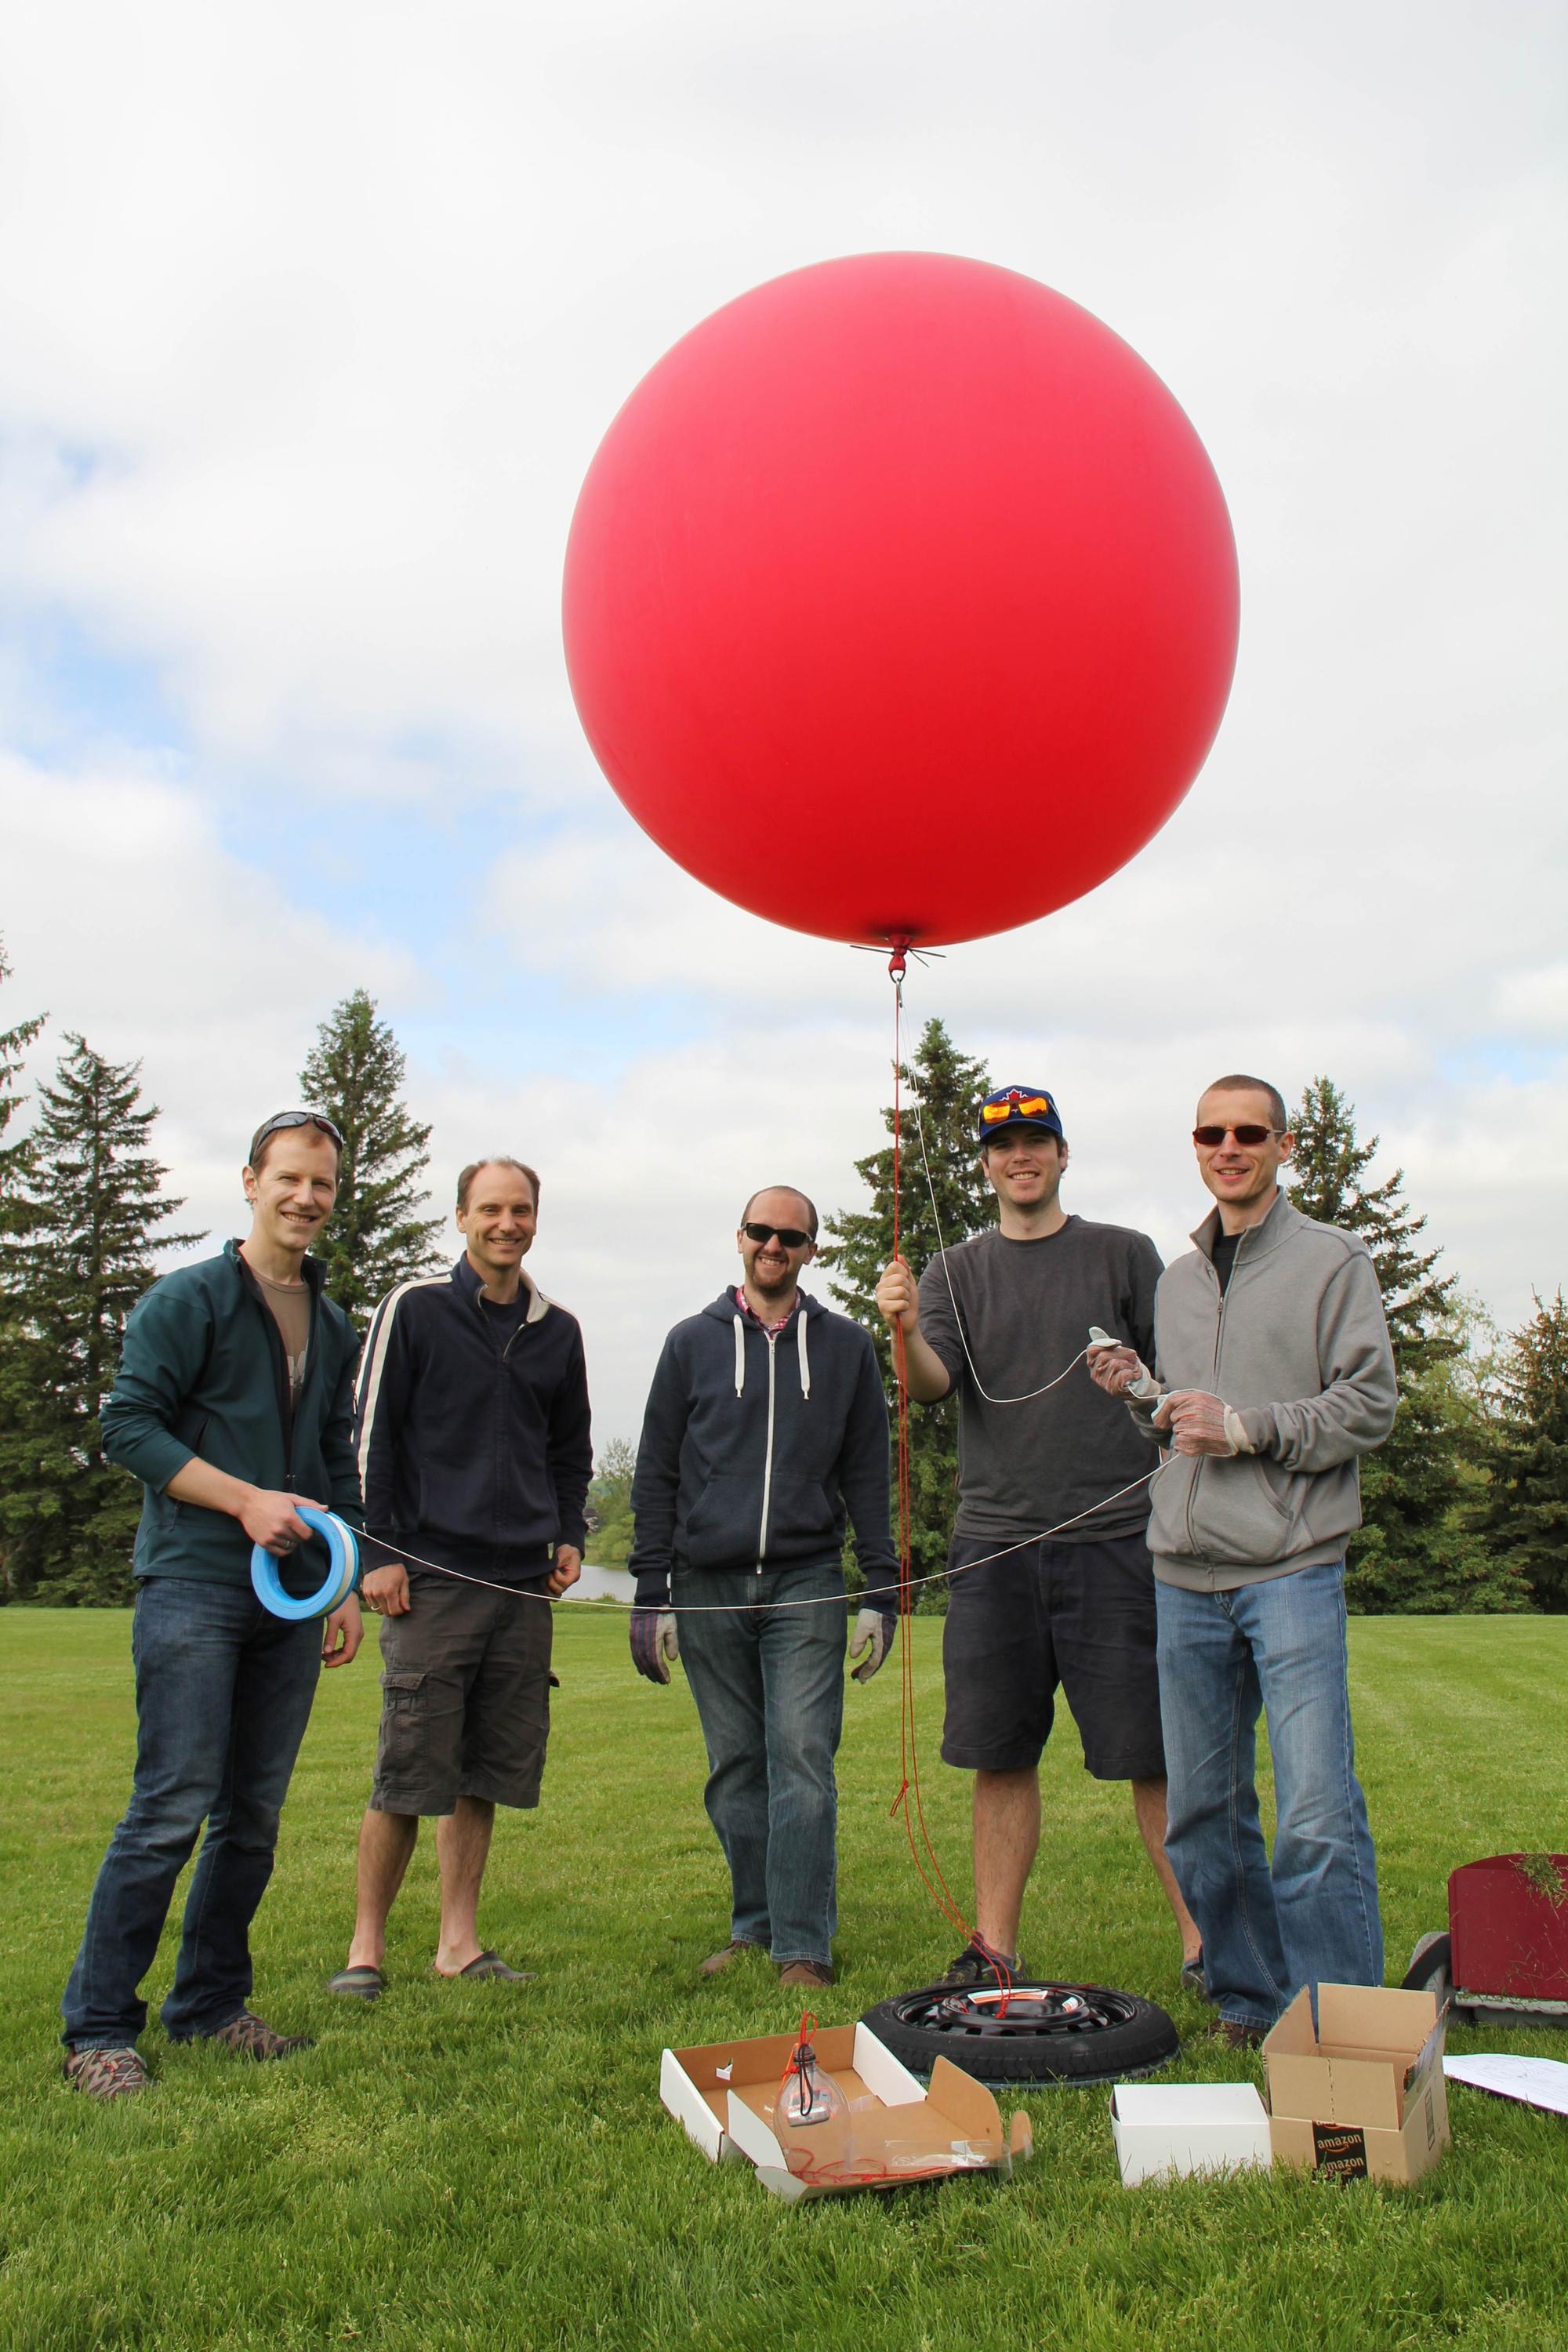 Peter, Scott, James, Grant, and Mike with the inflated balloon.